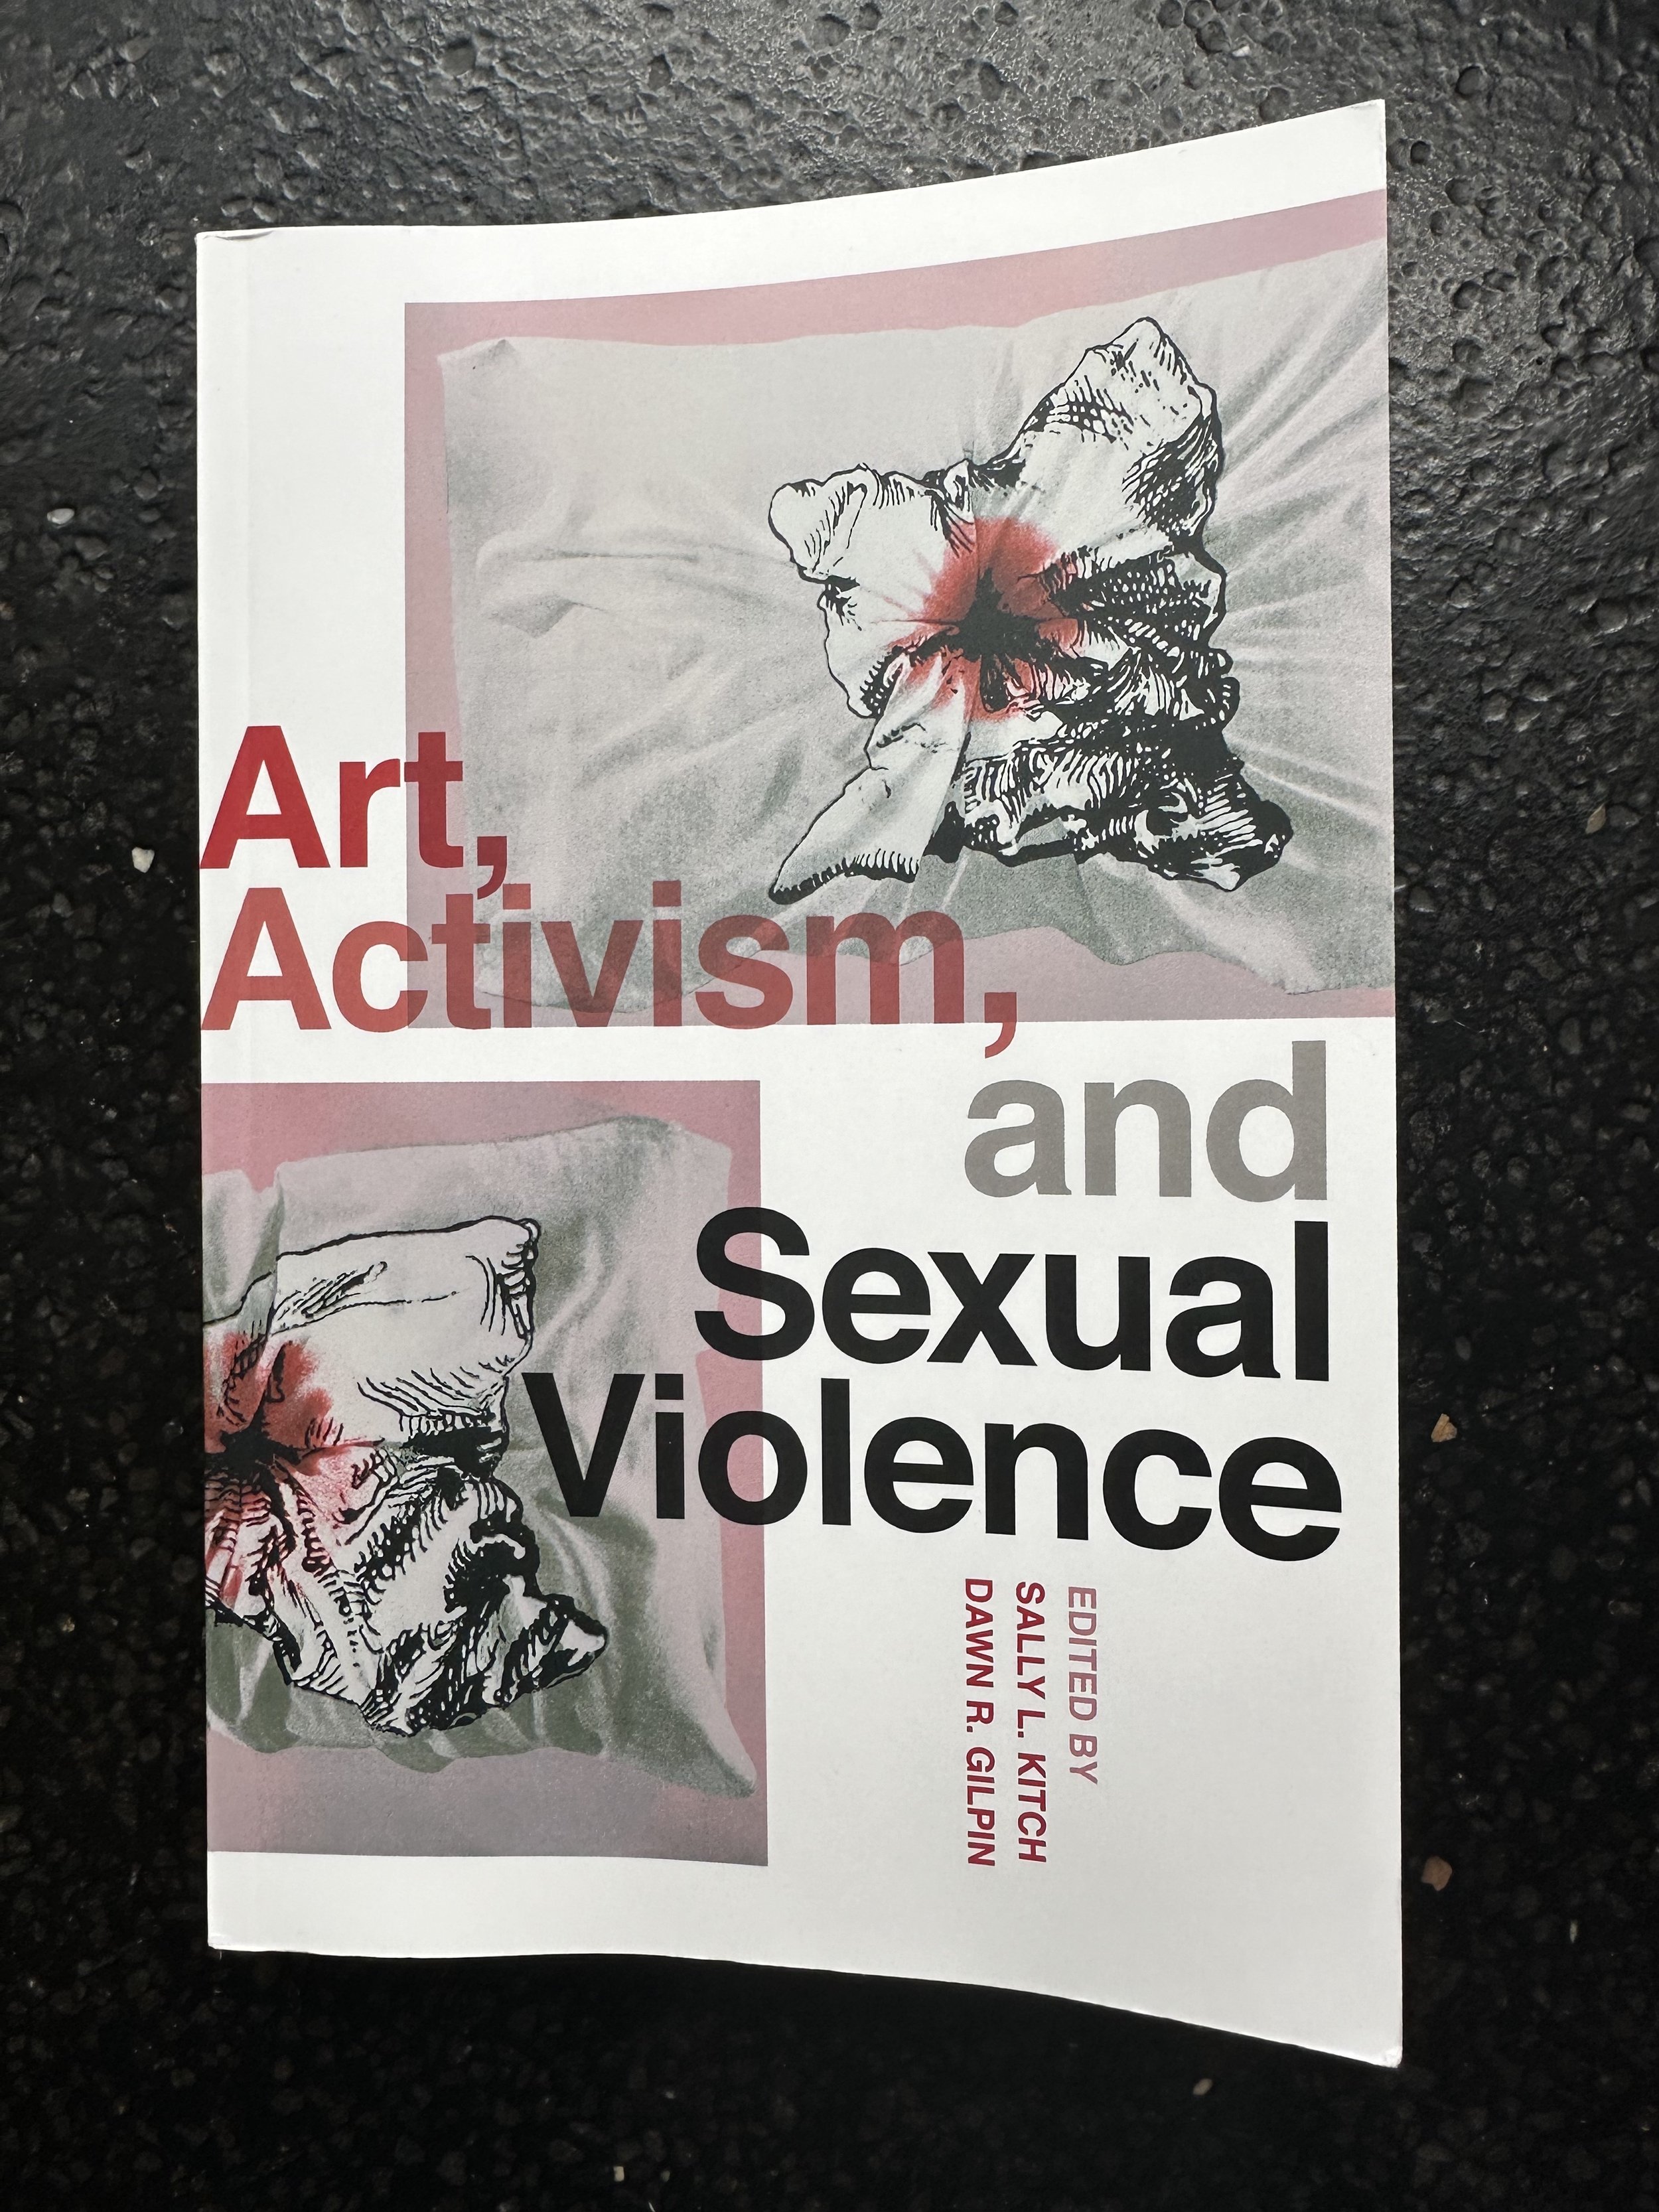 ART, ACTIVISM, AND SEXUAL VIOLENCE